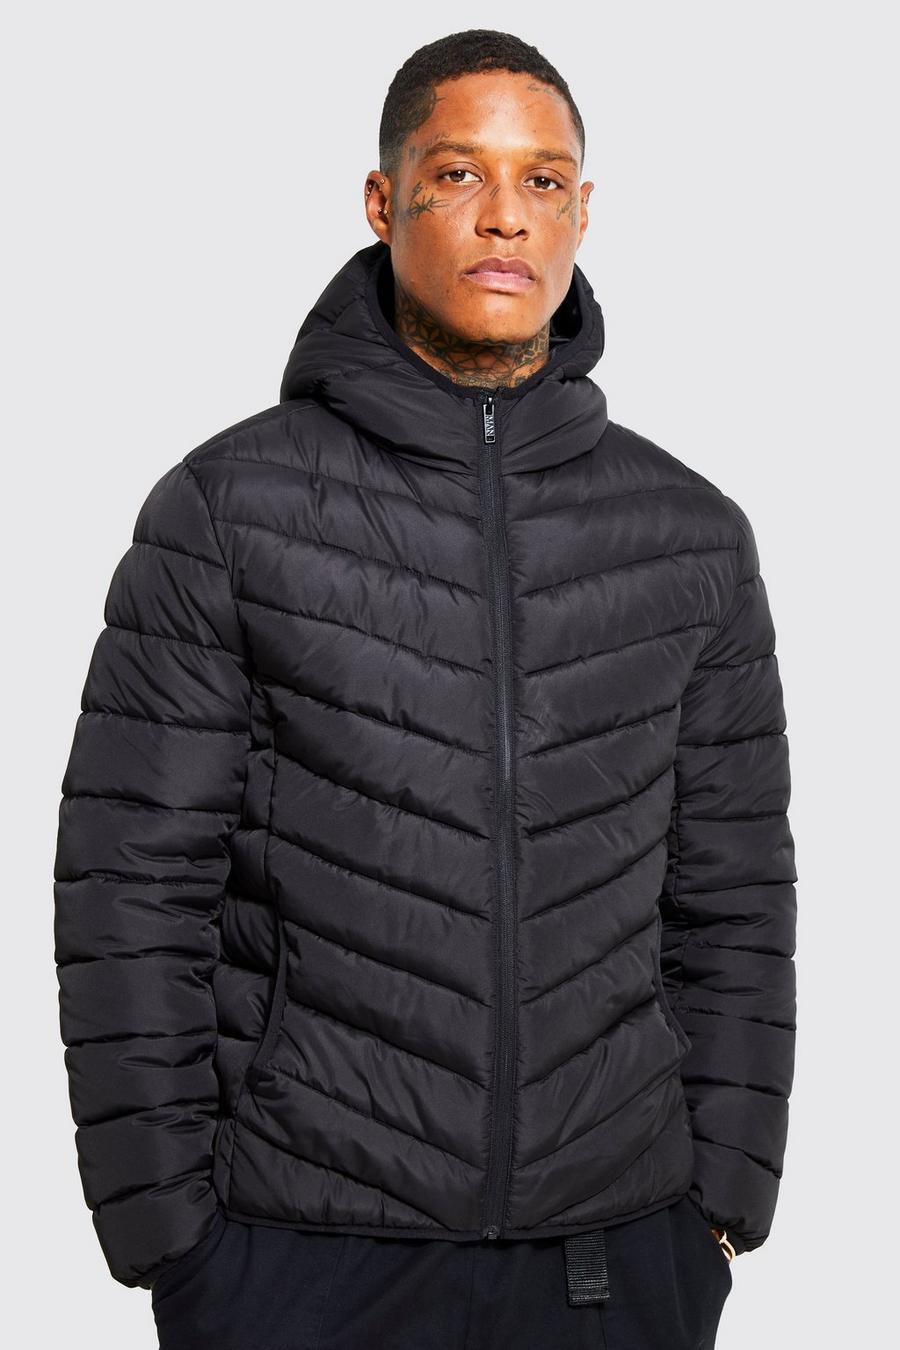 boohoo Mens Quilted Zip Through Jacket with Hood - Black L